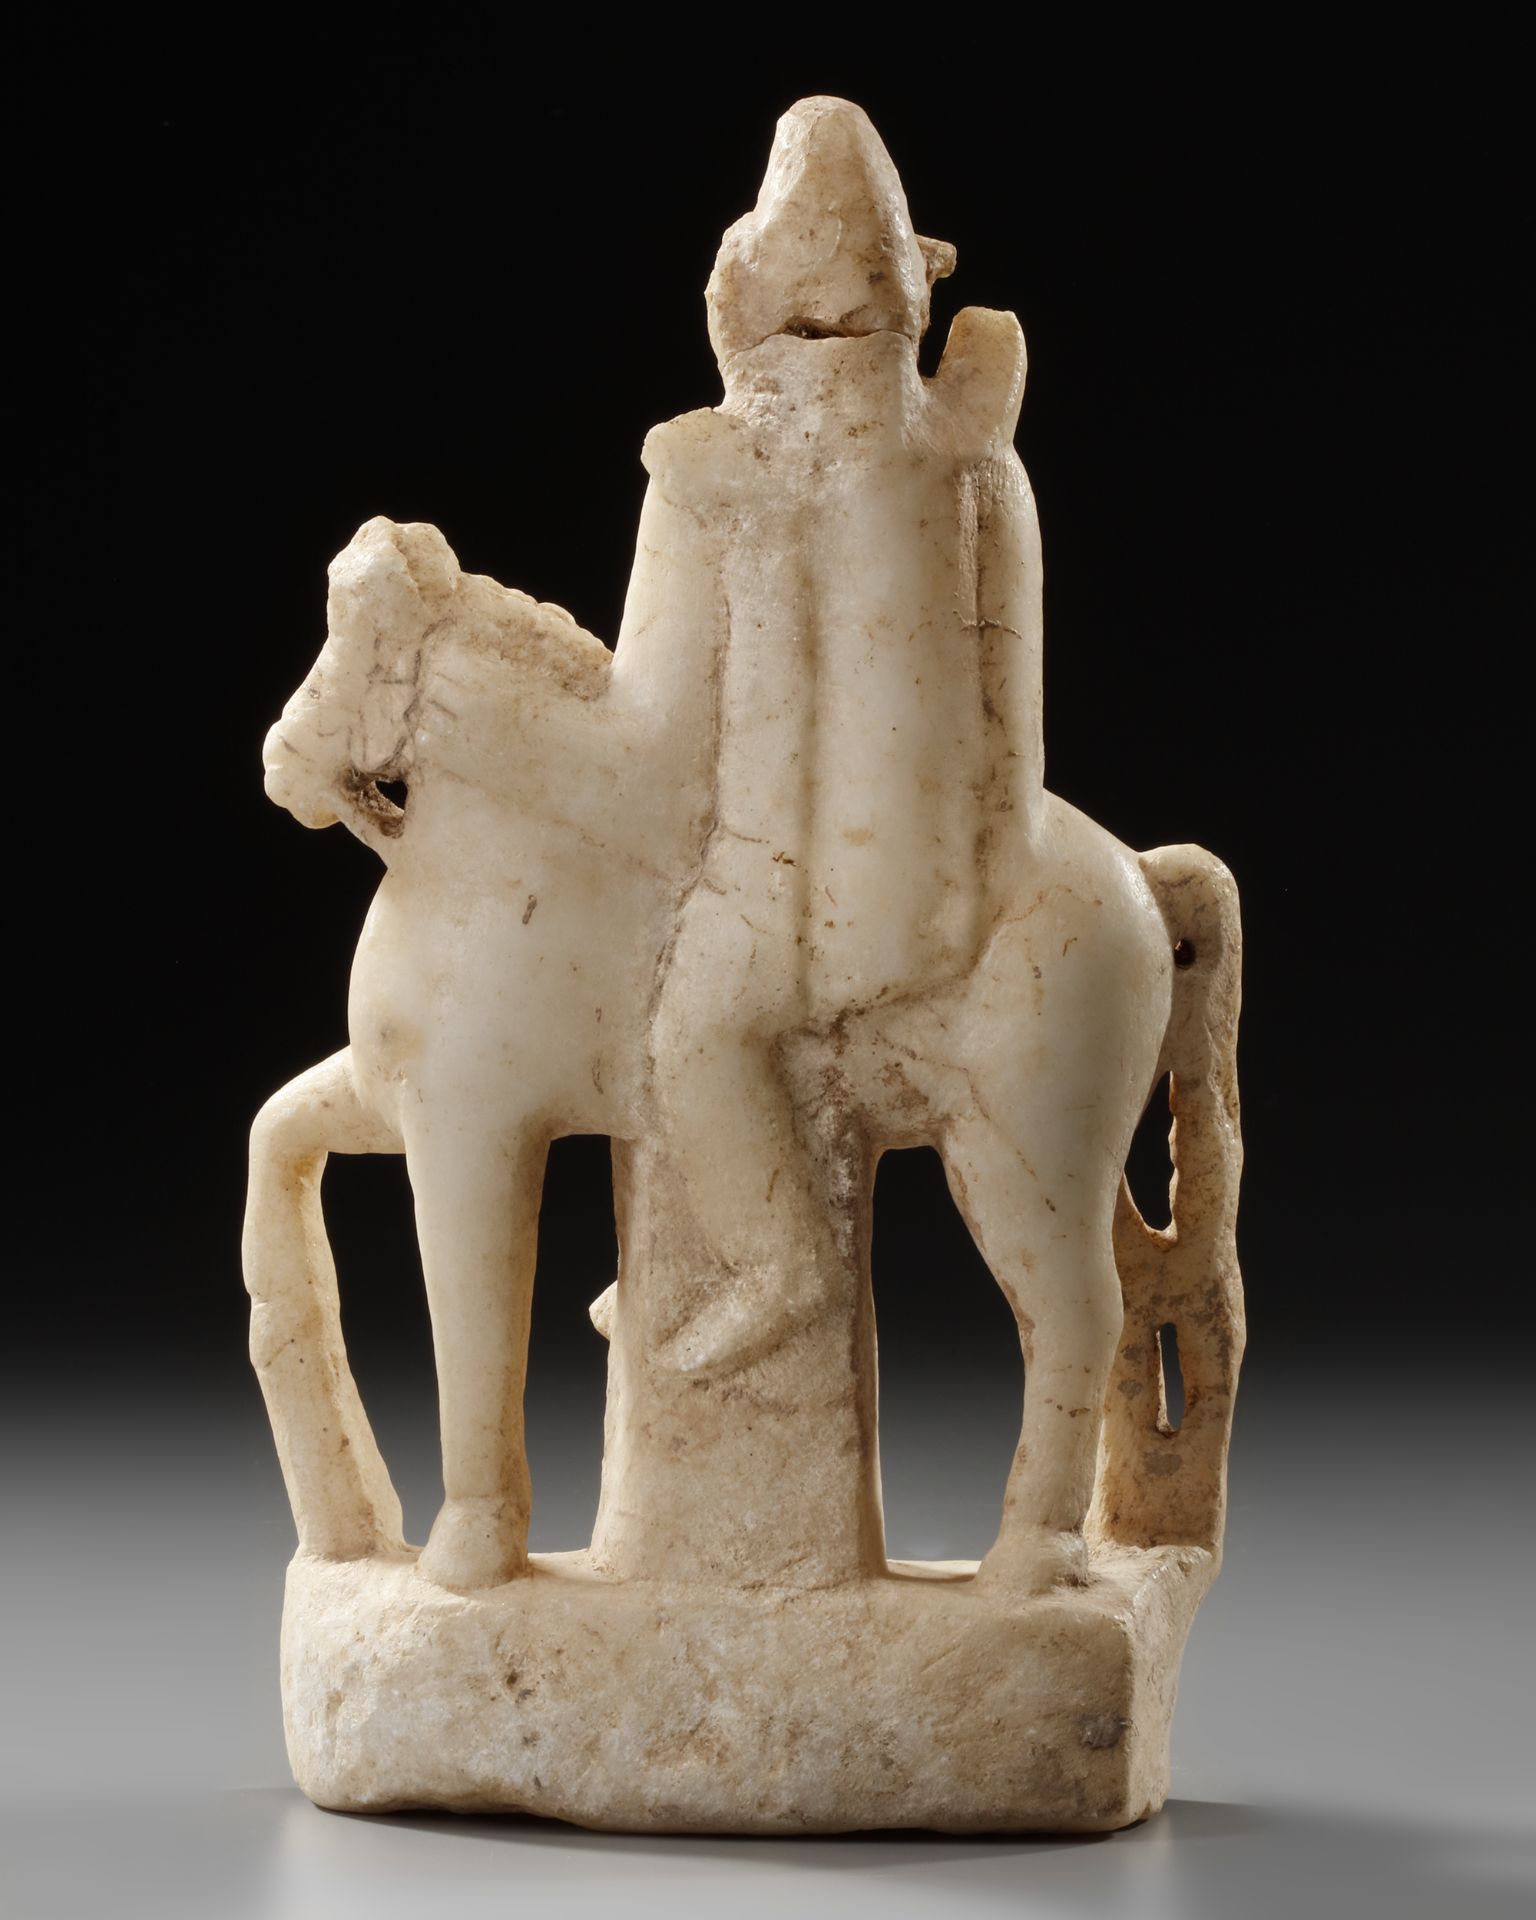 A ROMAN IMPERIAL STATUETTE OF THE GOD MAN ON HORSEBACK, CIRCA 2ND-3RD CENTURY A.D. - Image 3 of 5